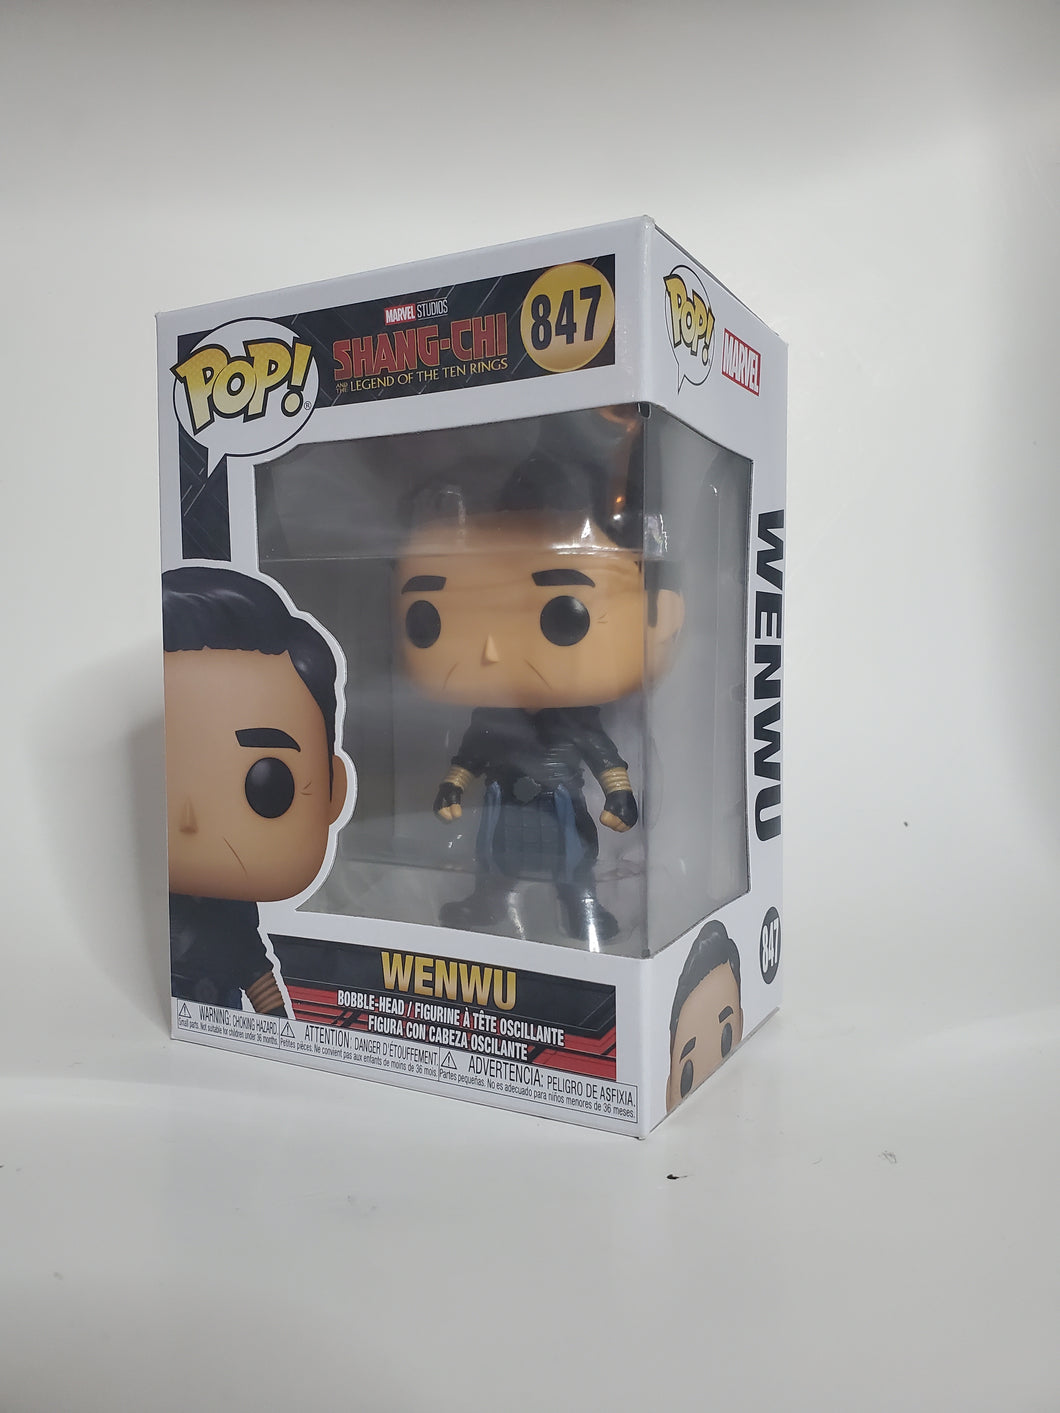 Marvel Studios Shang-Chi and the Legend of the Ten Rings Wenwu Funko POP